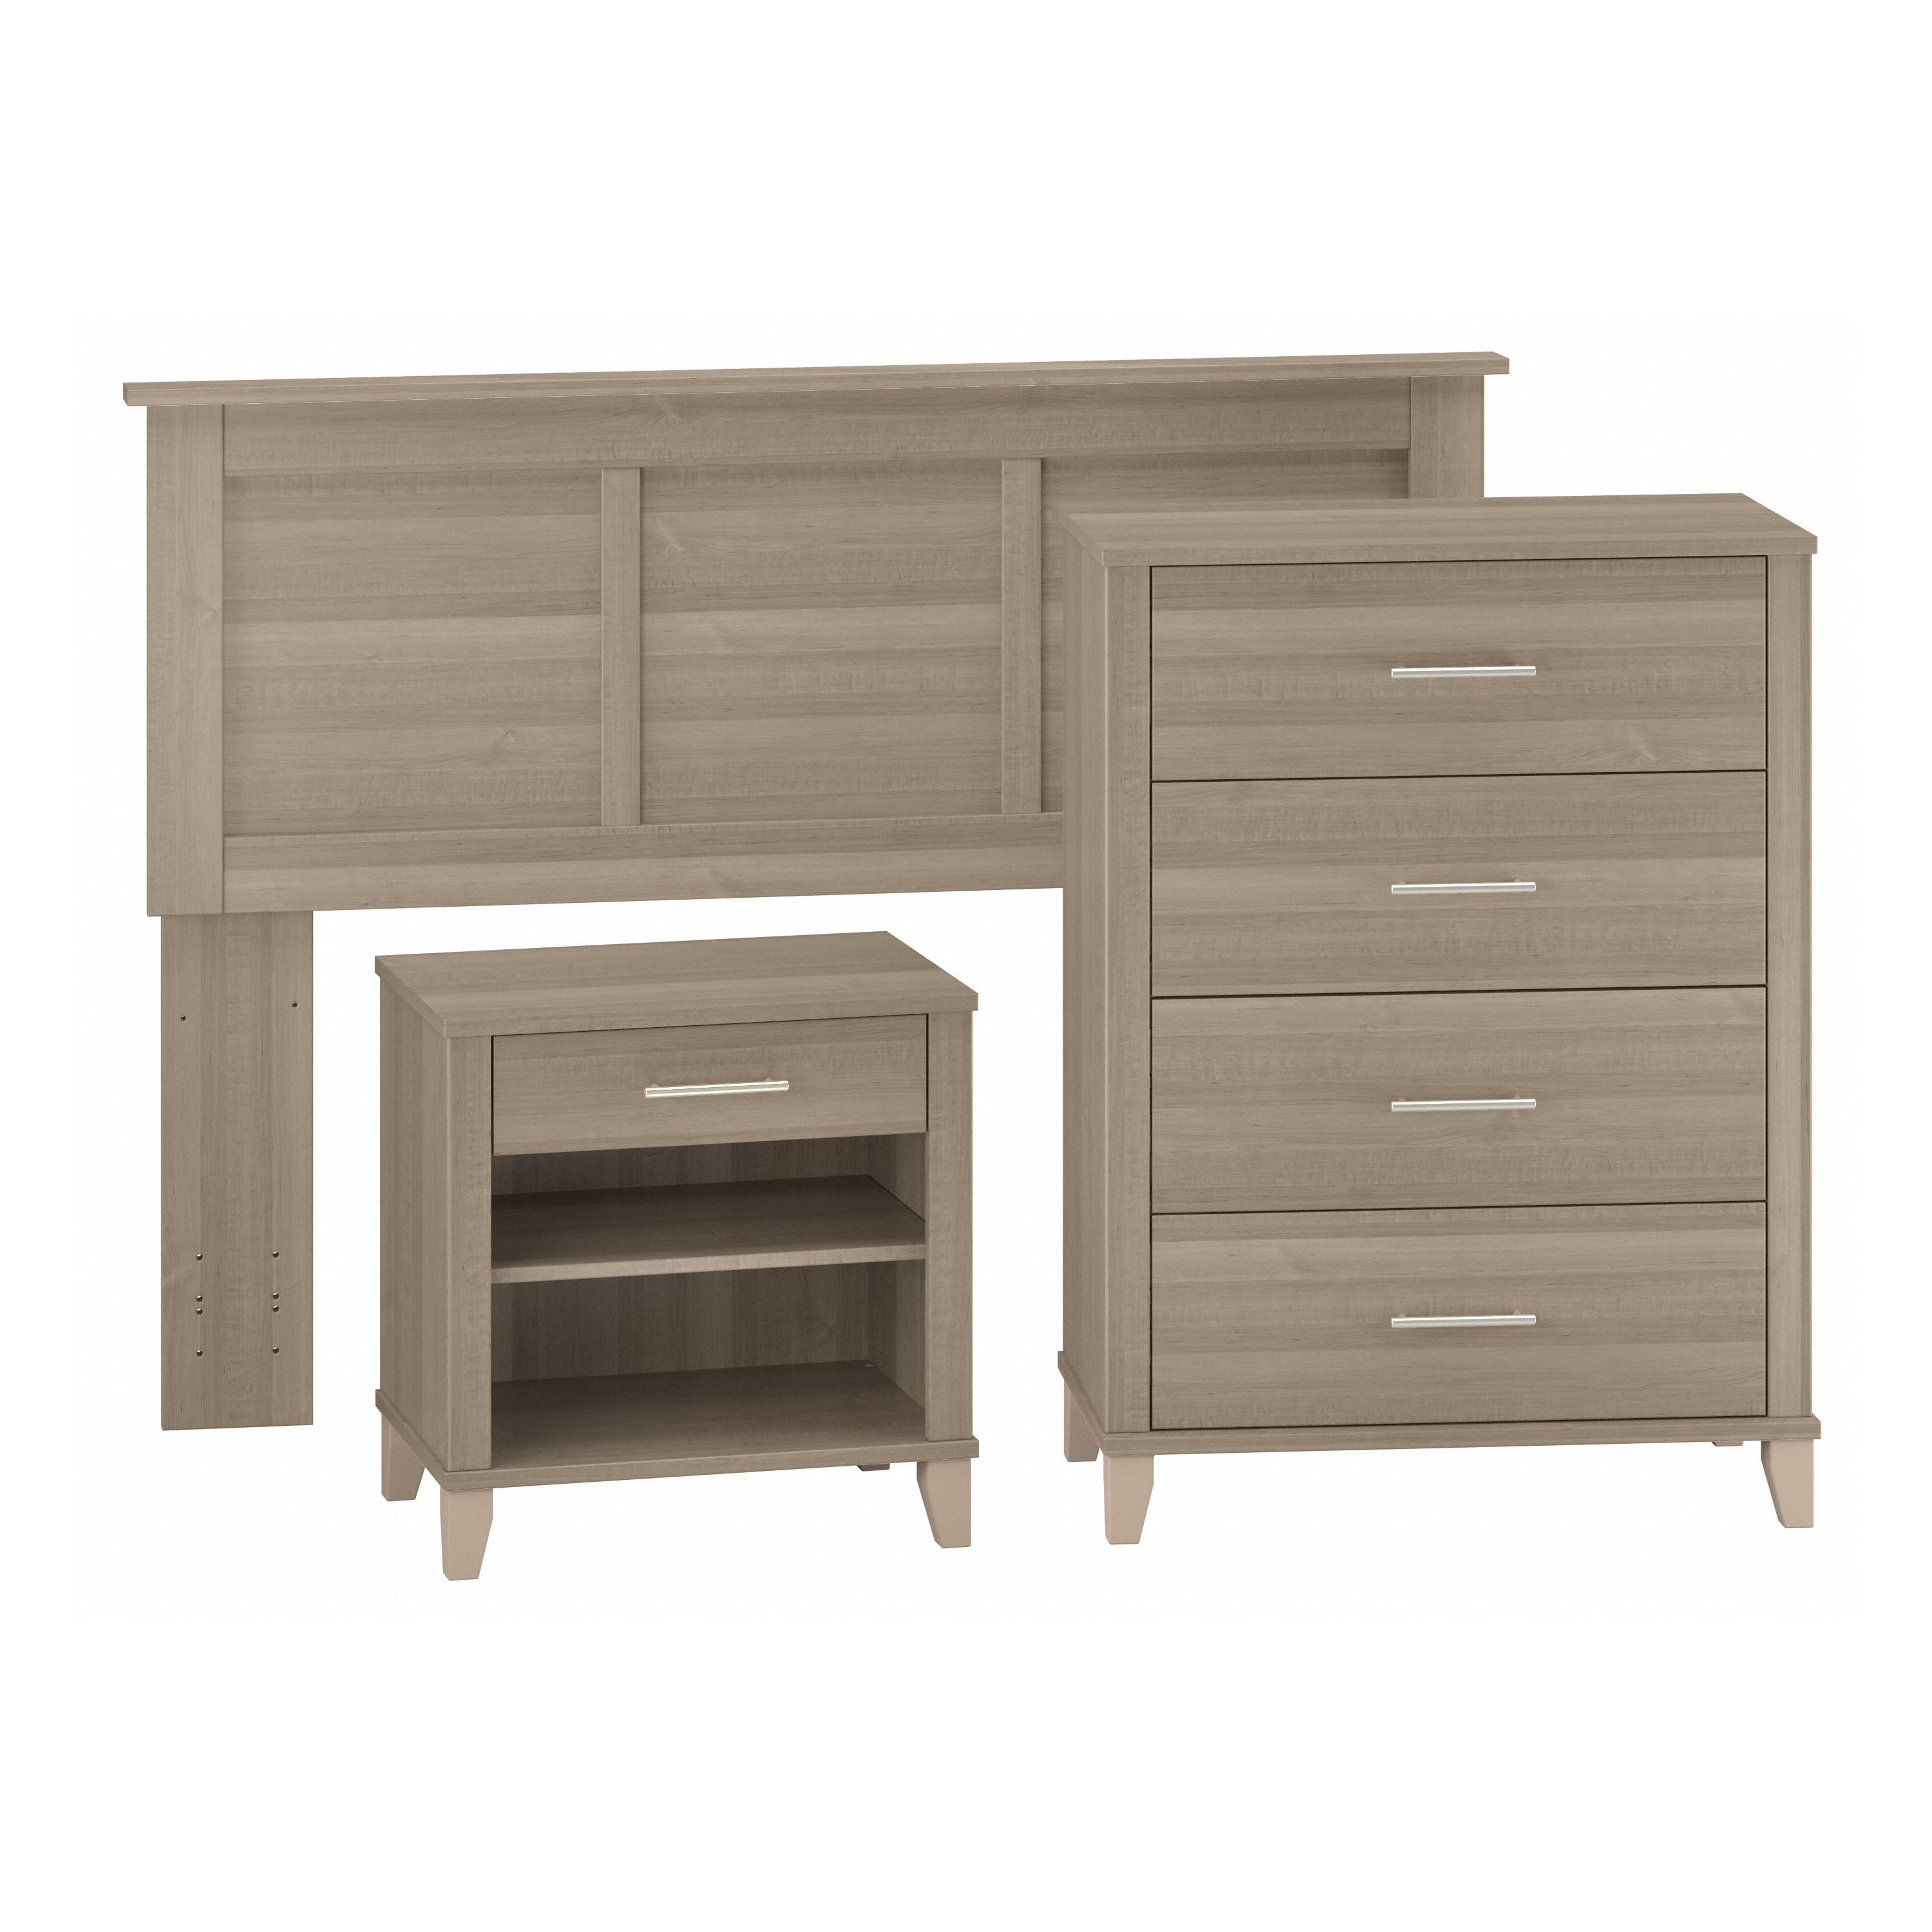 Shop Bush Furniture Somerset Full/Queen Size Headboard, Chest of Drawers and Nightstand Bedroom Set 02 SET005AG #color_ash gray